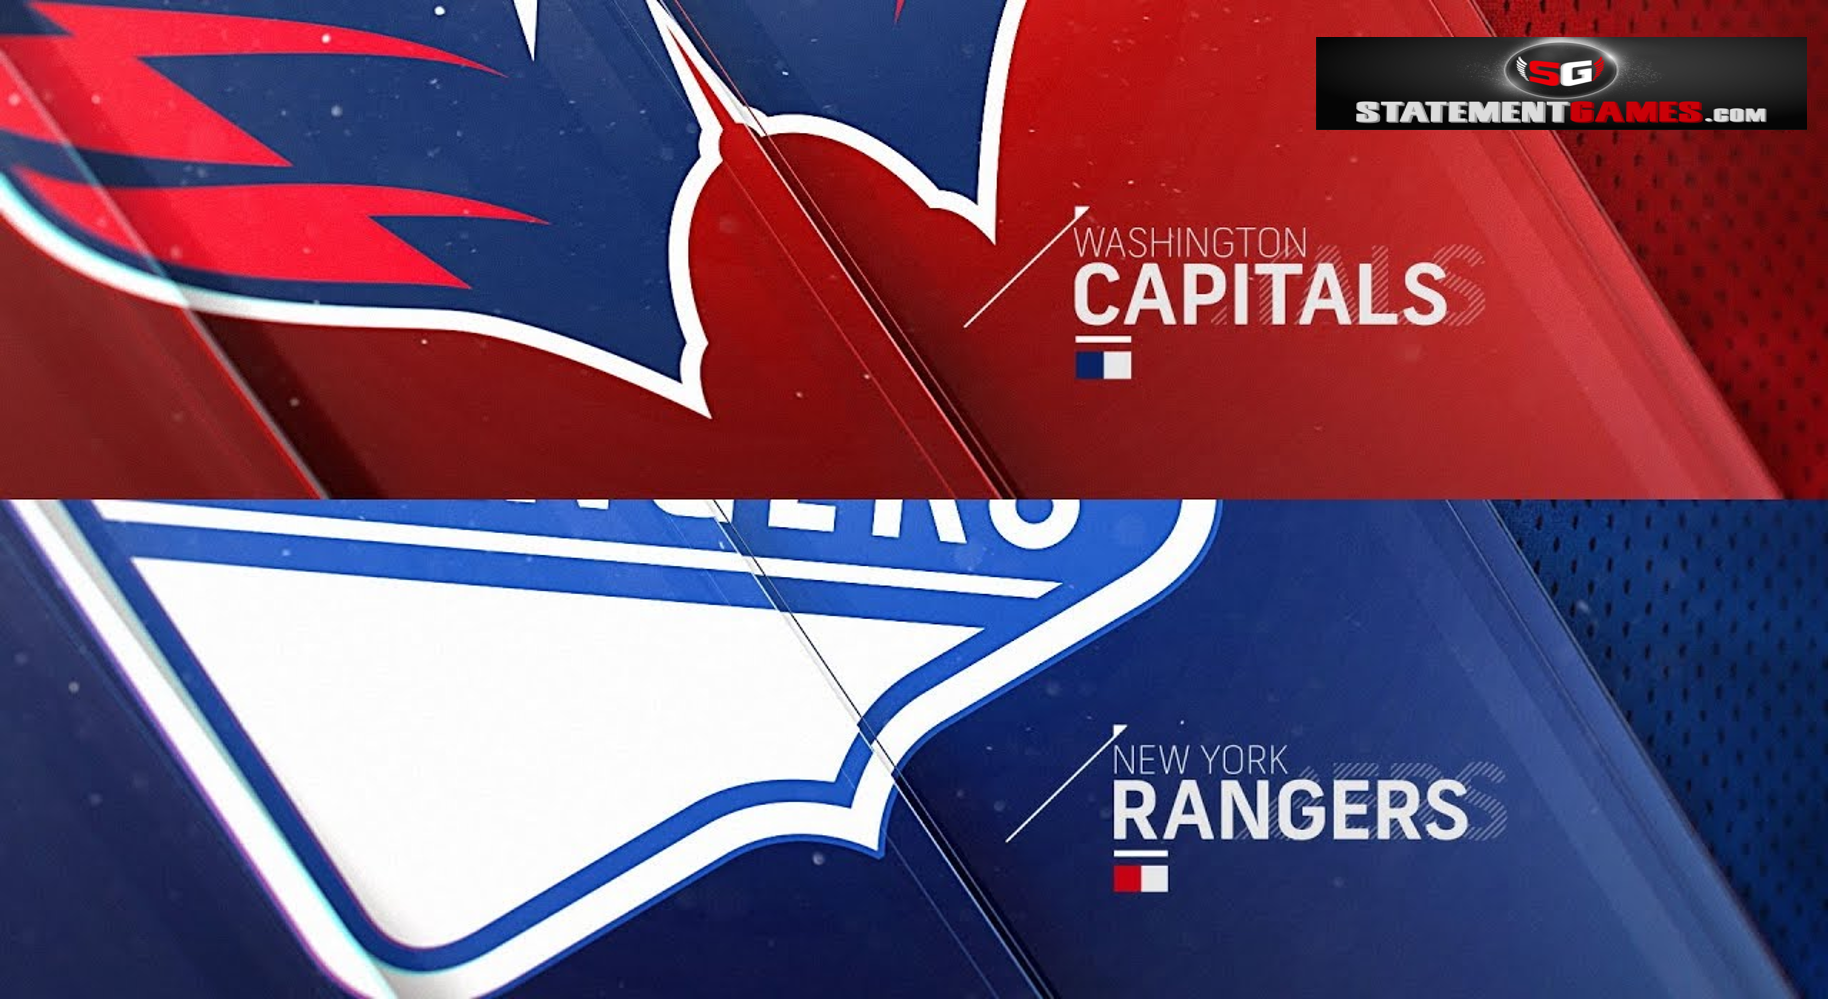 Washington Capitals Vs New York Rangers – NHL Game Day Preview: 02.04.2021